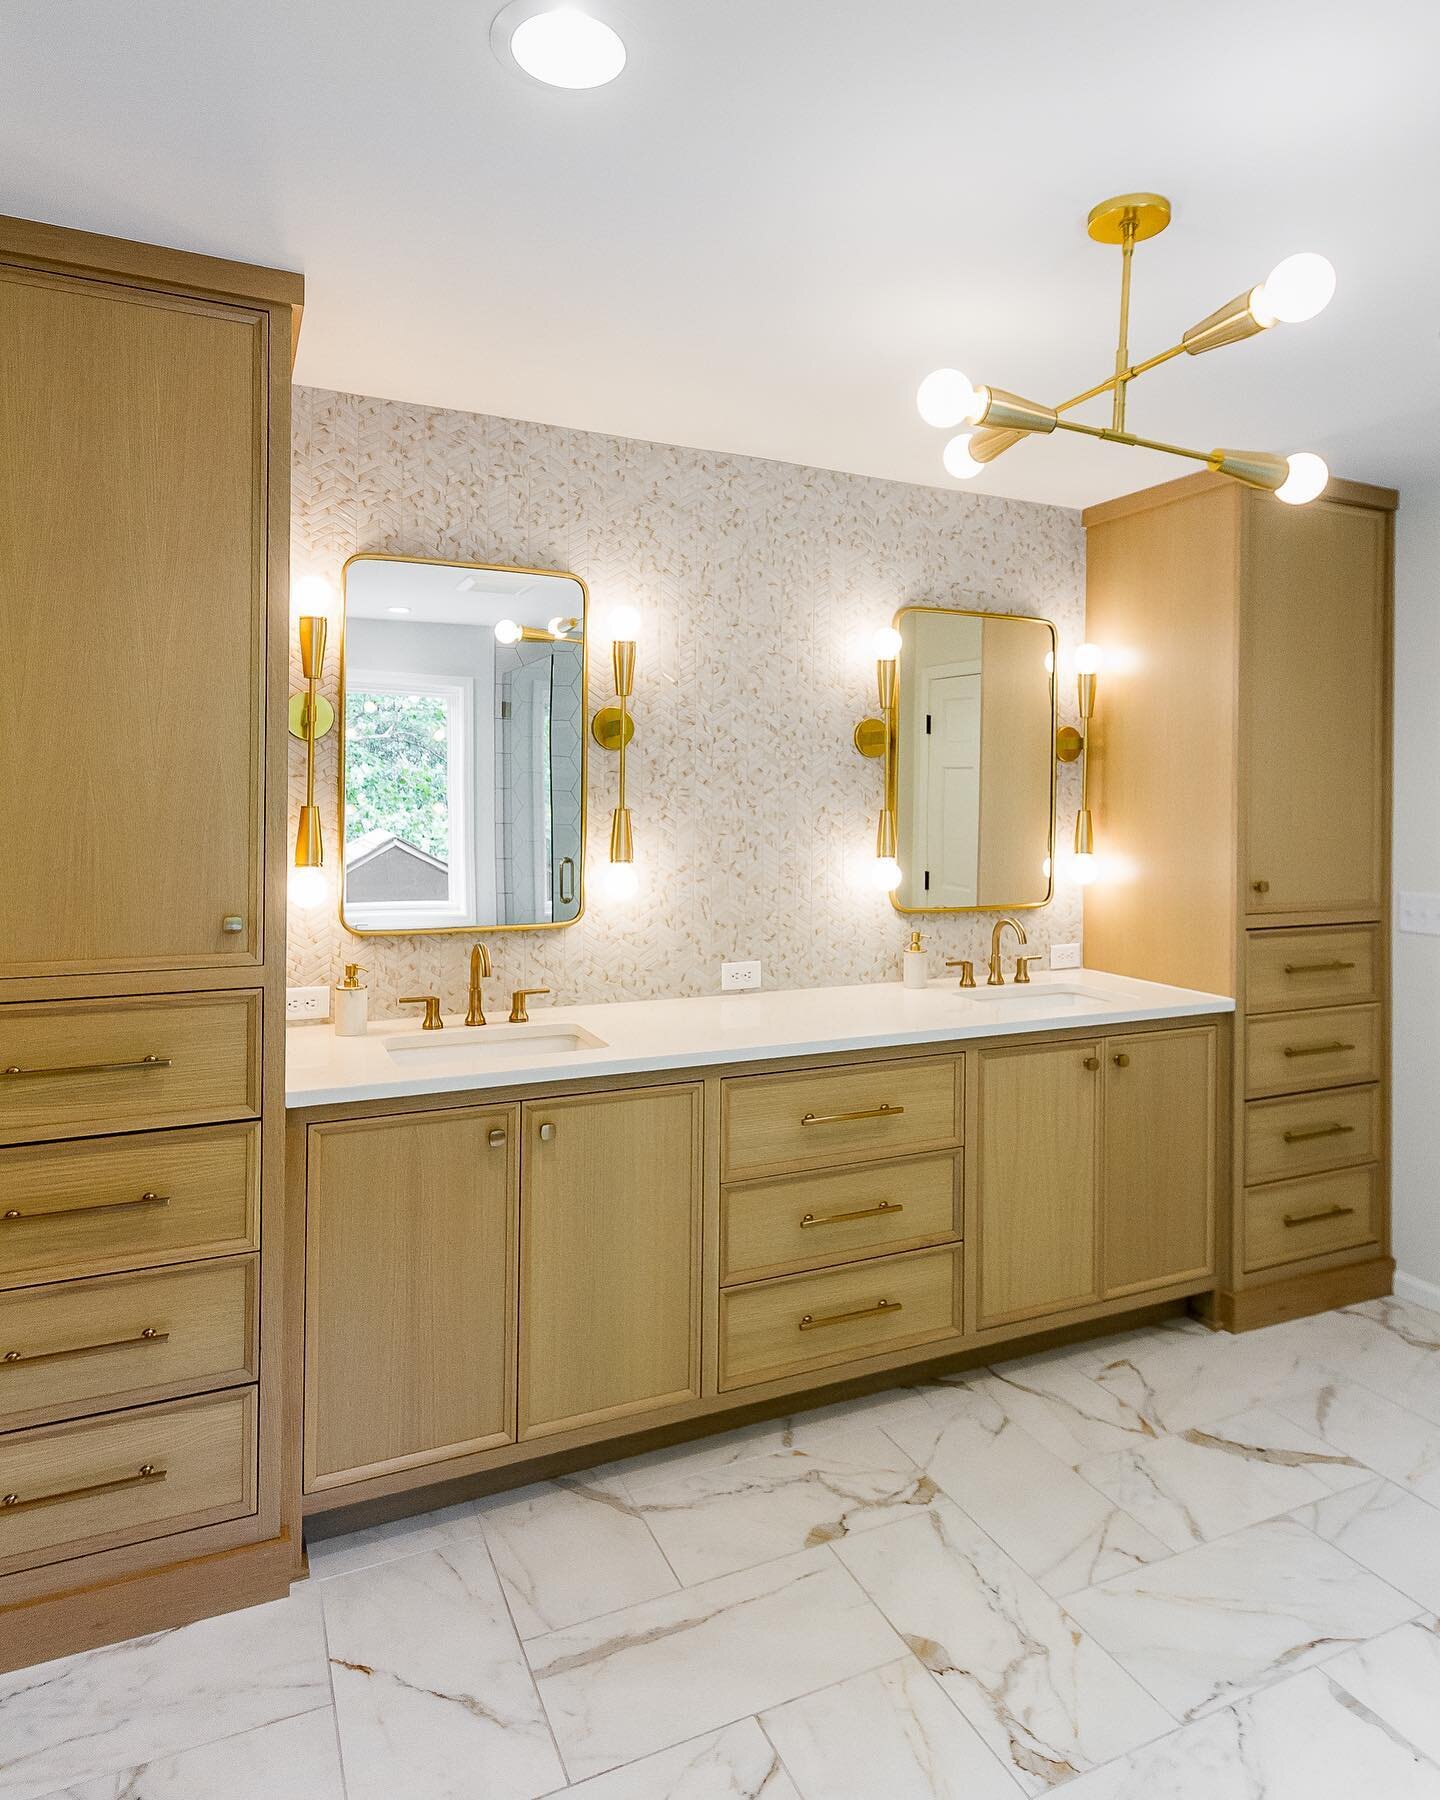 We completed this master bathroom remodel earlier this year. Can&rsquo;t get enough of the white oak cabinetry and gold hardware &amp; light fixture accents. As always, @marciknoffinteriors design made our jobs easy!
&bull;
&bull;
&bull;
@parkscabine